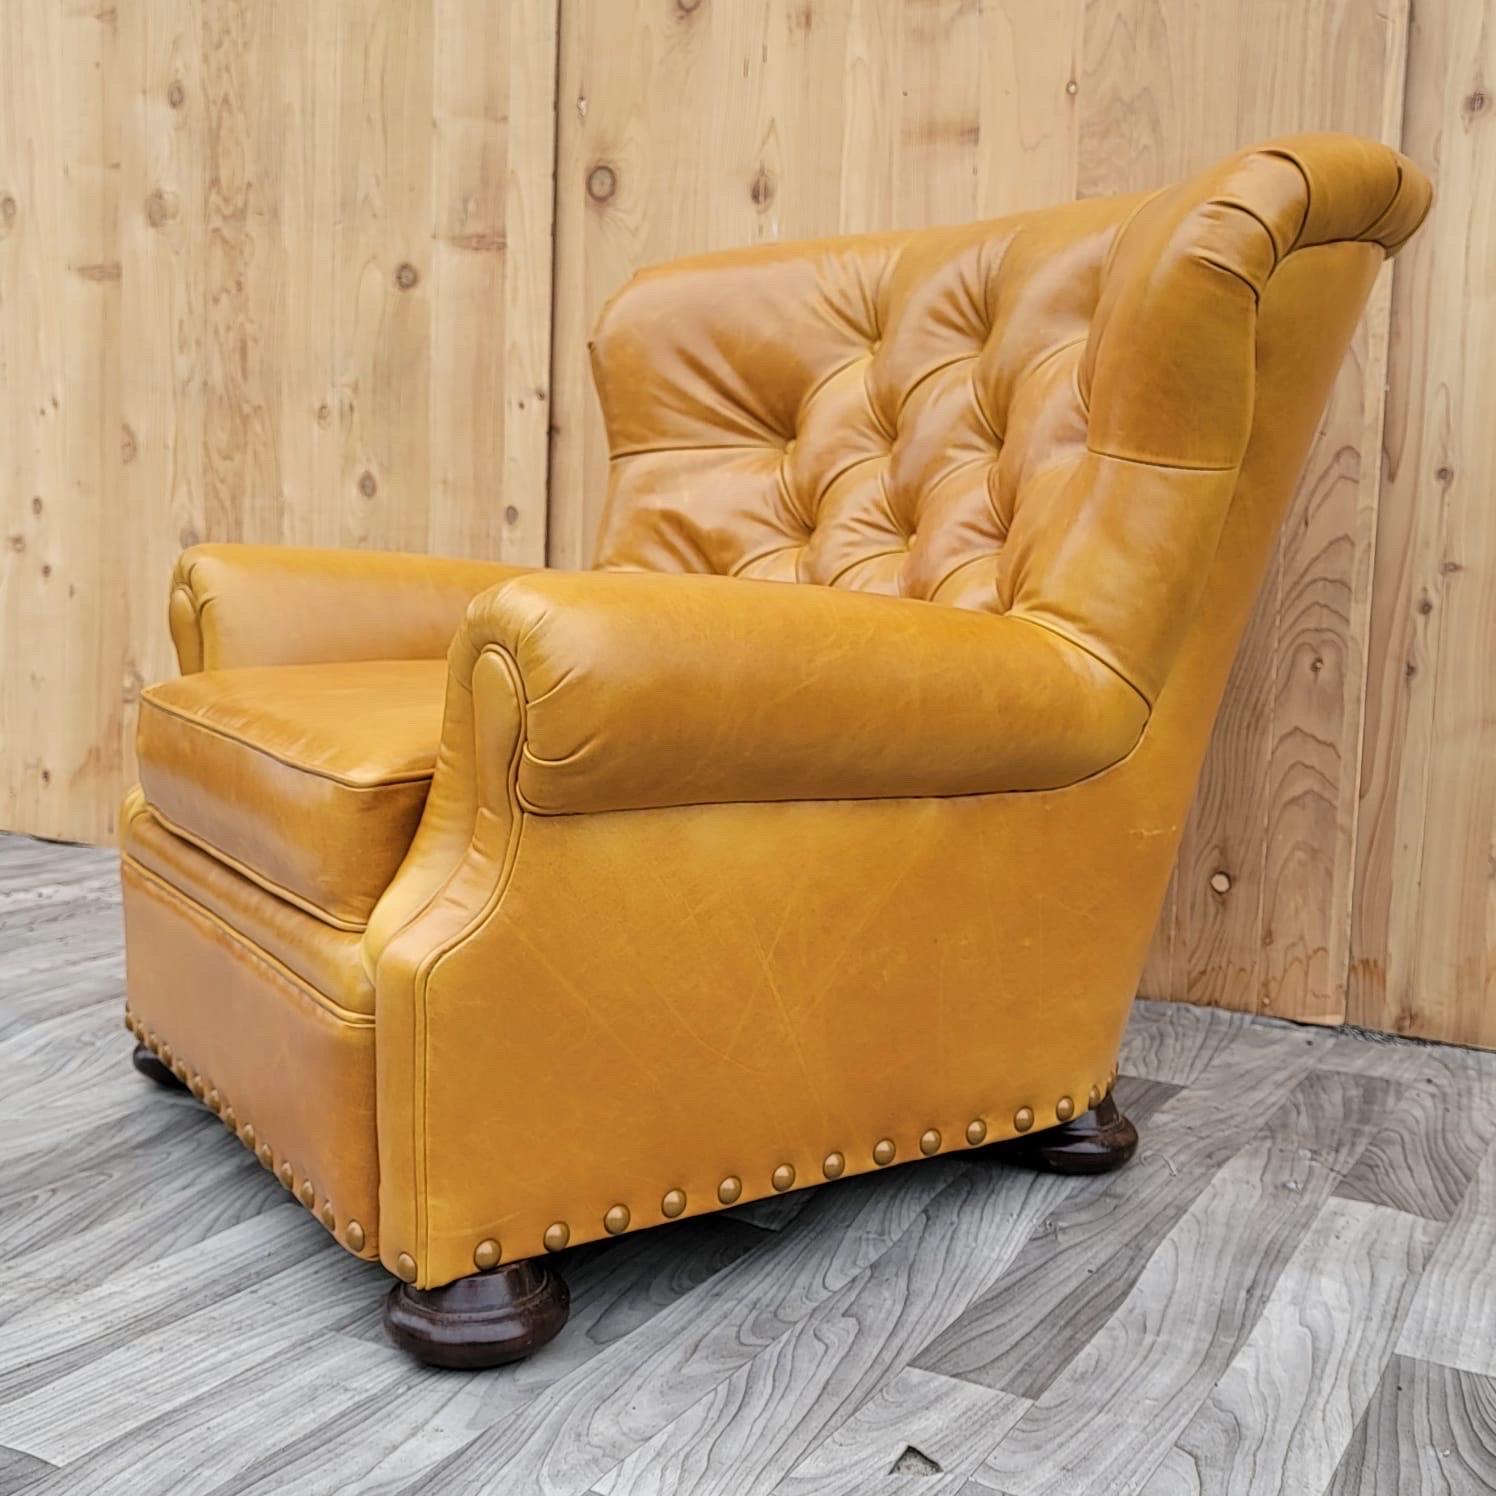 Vintage Ralph Lauren Oversized Tufted Chesterfield Wingback Lounge Chair & Ottoman Newly Upholstered in a High End Full-Grain Cognac Distressed Italian Leather - 2 Piece Set 

This beautiful wingback chair and ottoman is meant to be totally